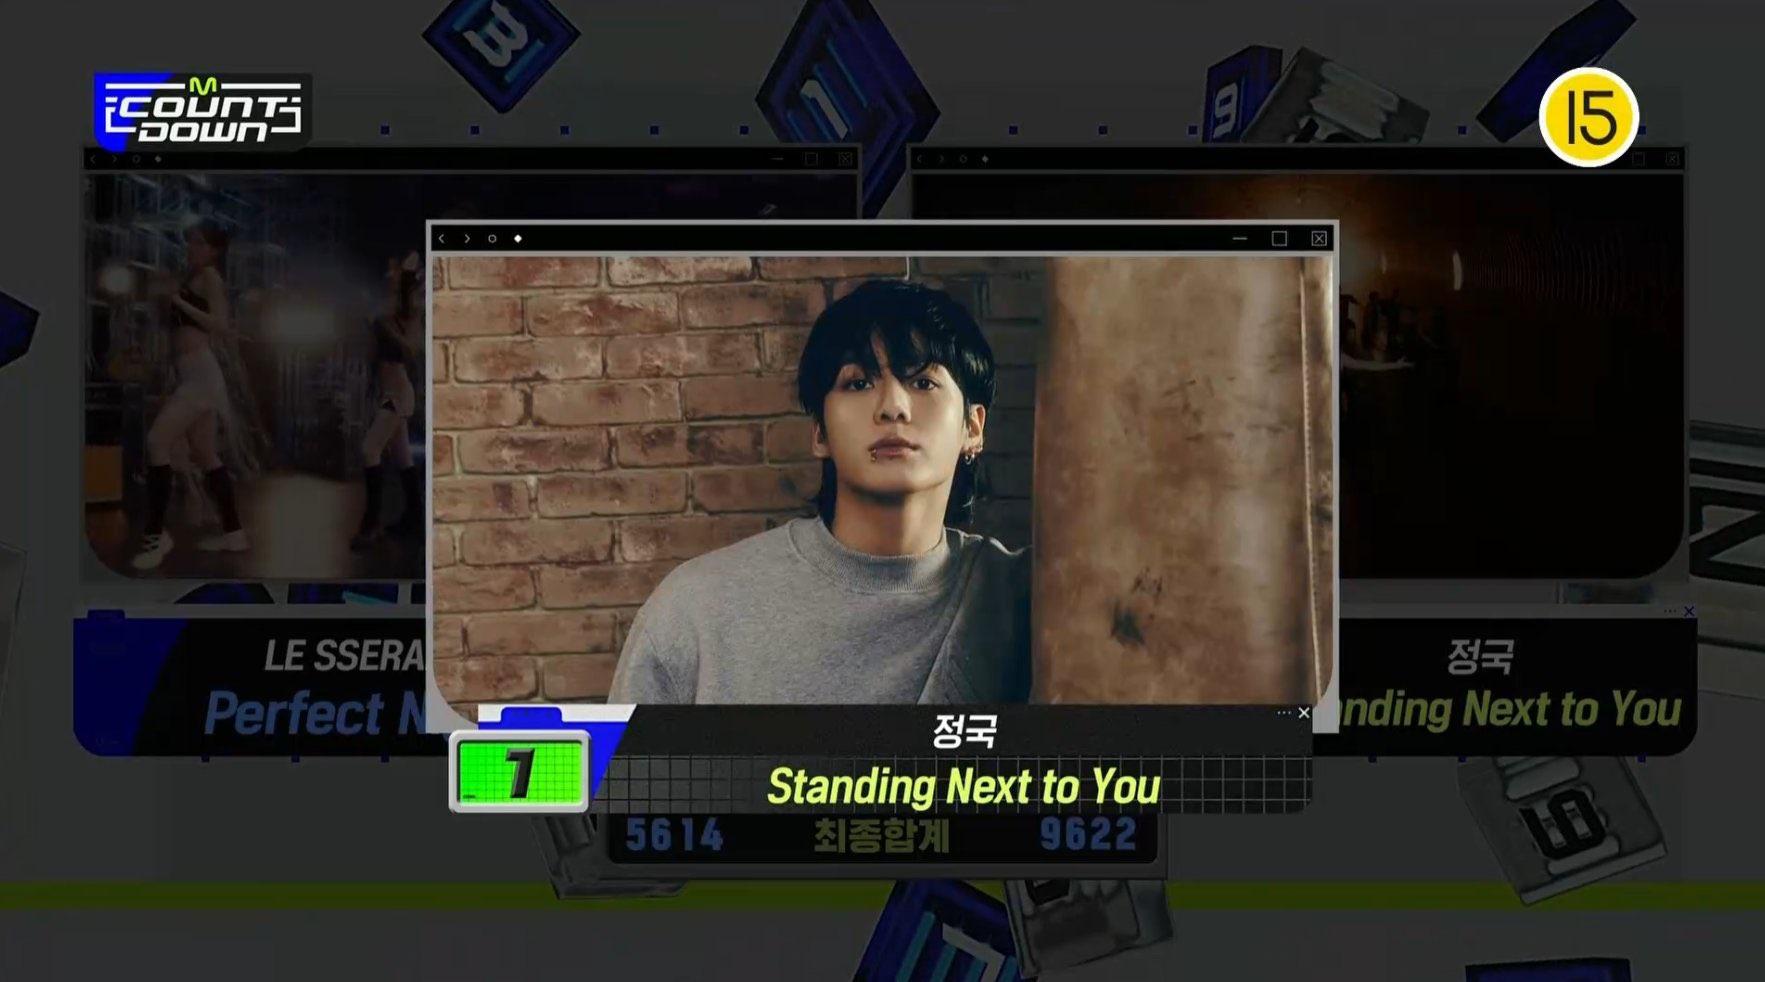 231109 Jungkook has taken his 1st win for “Standing Next to You” on this week’s M COUNTDOWN